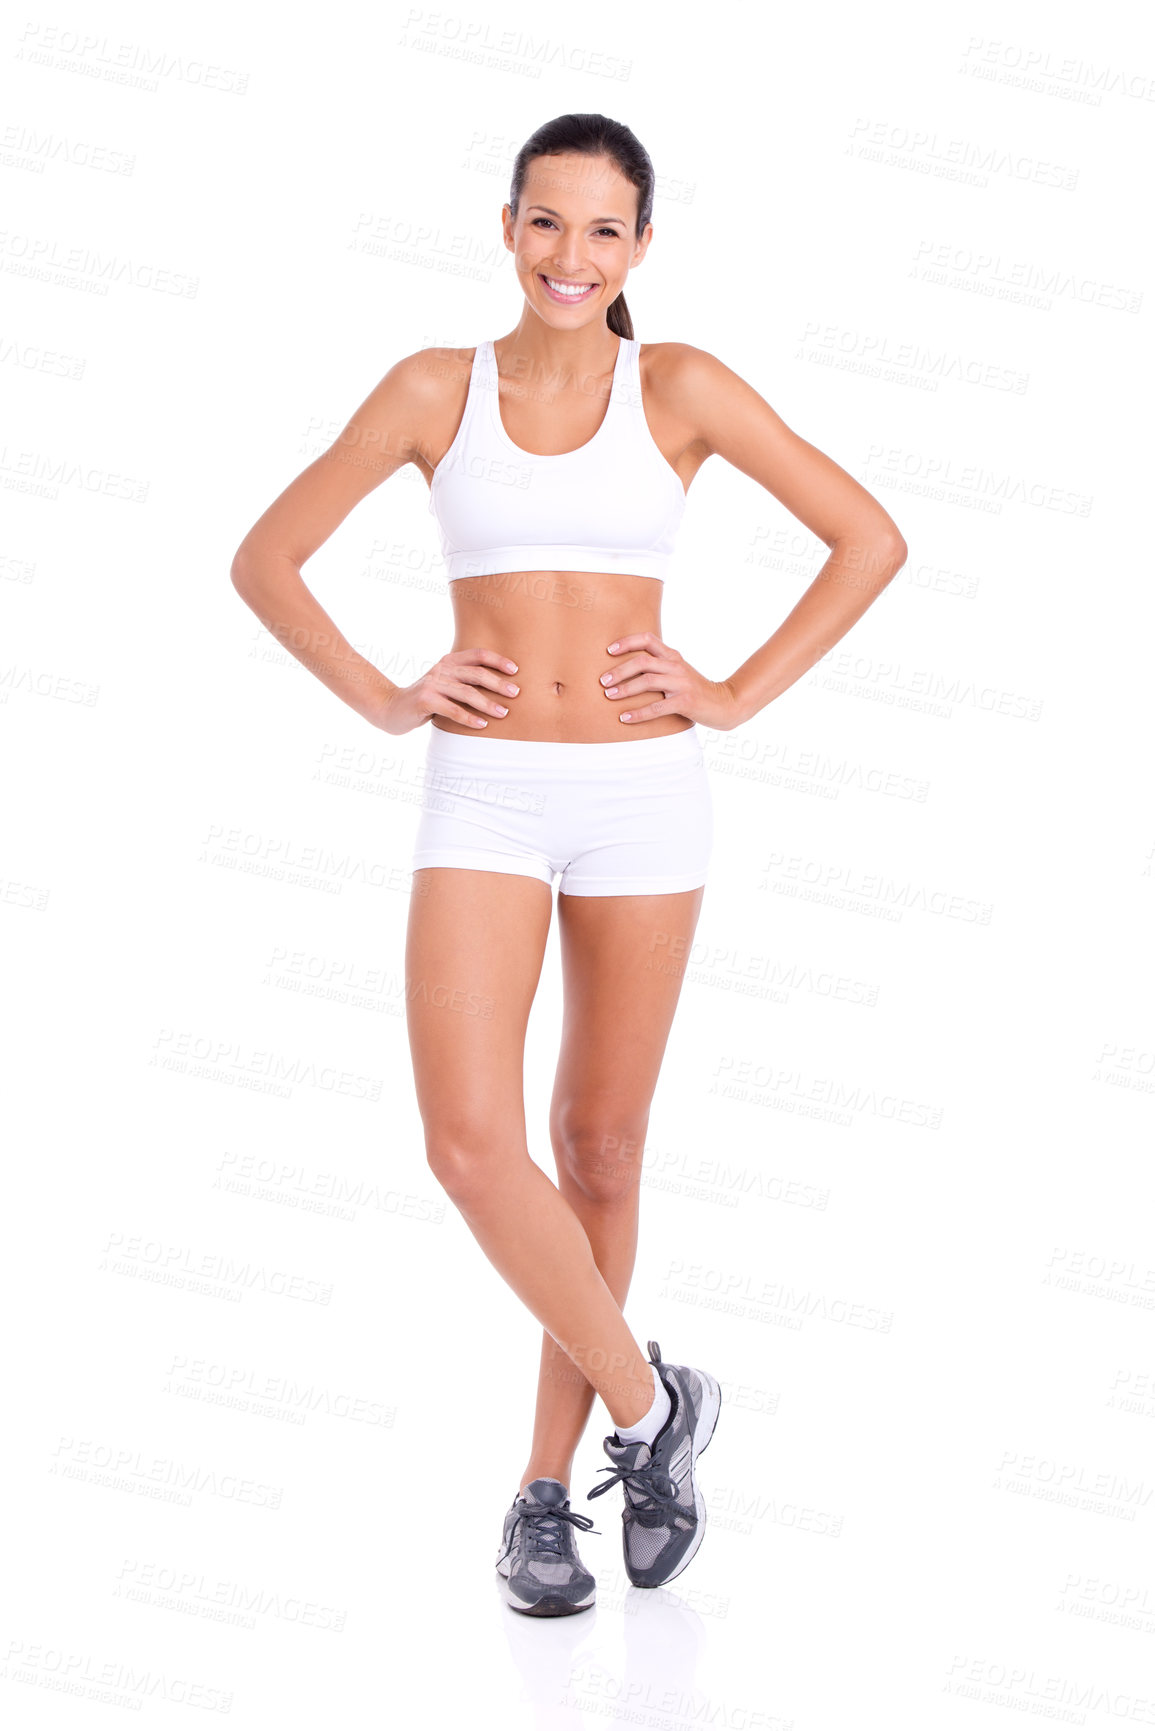 Buy stock photo Studio portrait of a fit young woman in exercise gear isolated on white